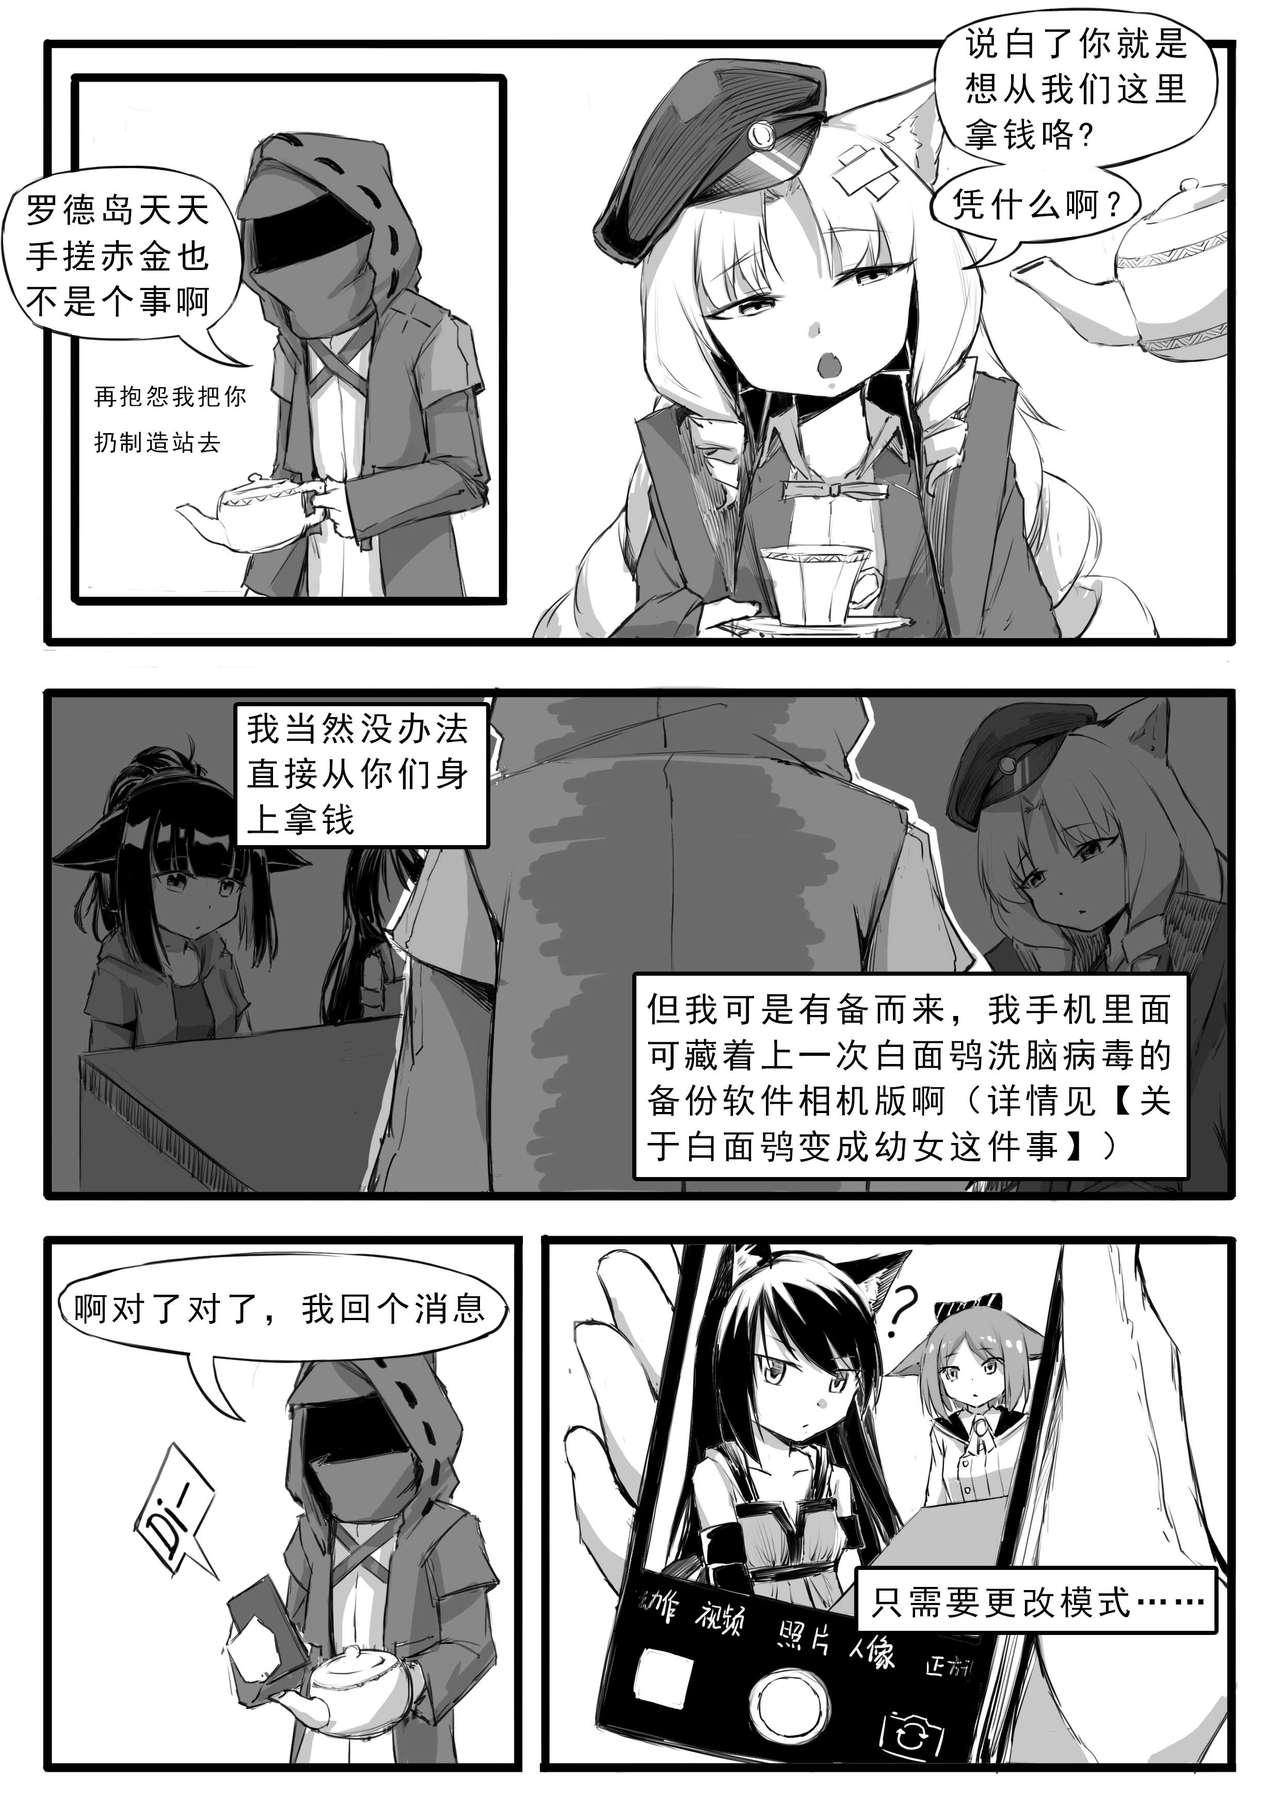 Cock Suckers 本博士不想努力了 - Arknights Gay Party - Page 5